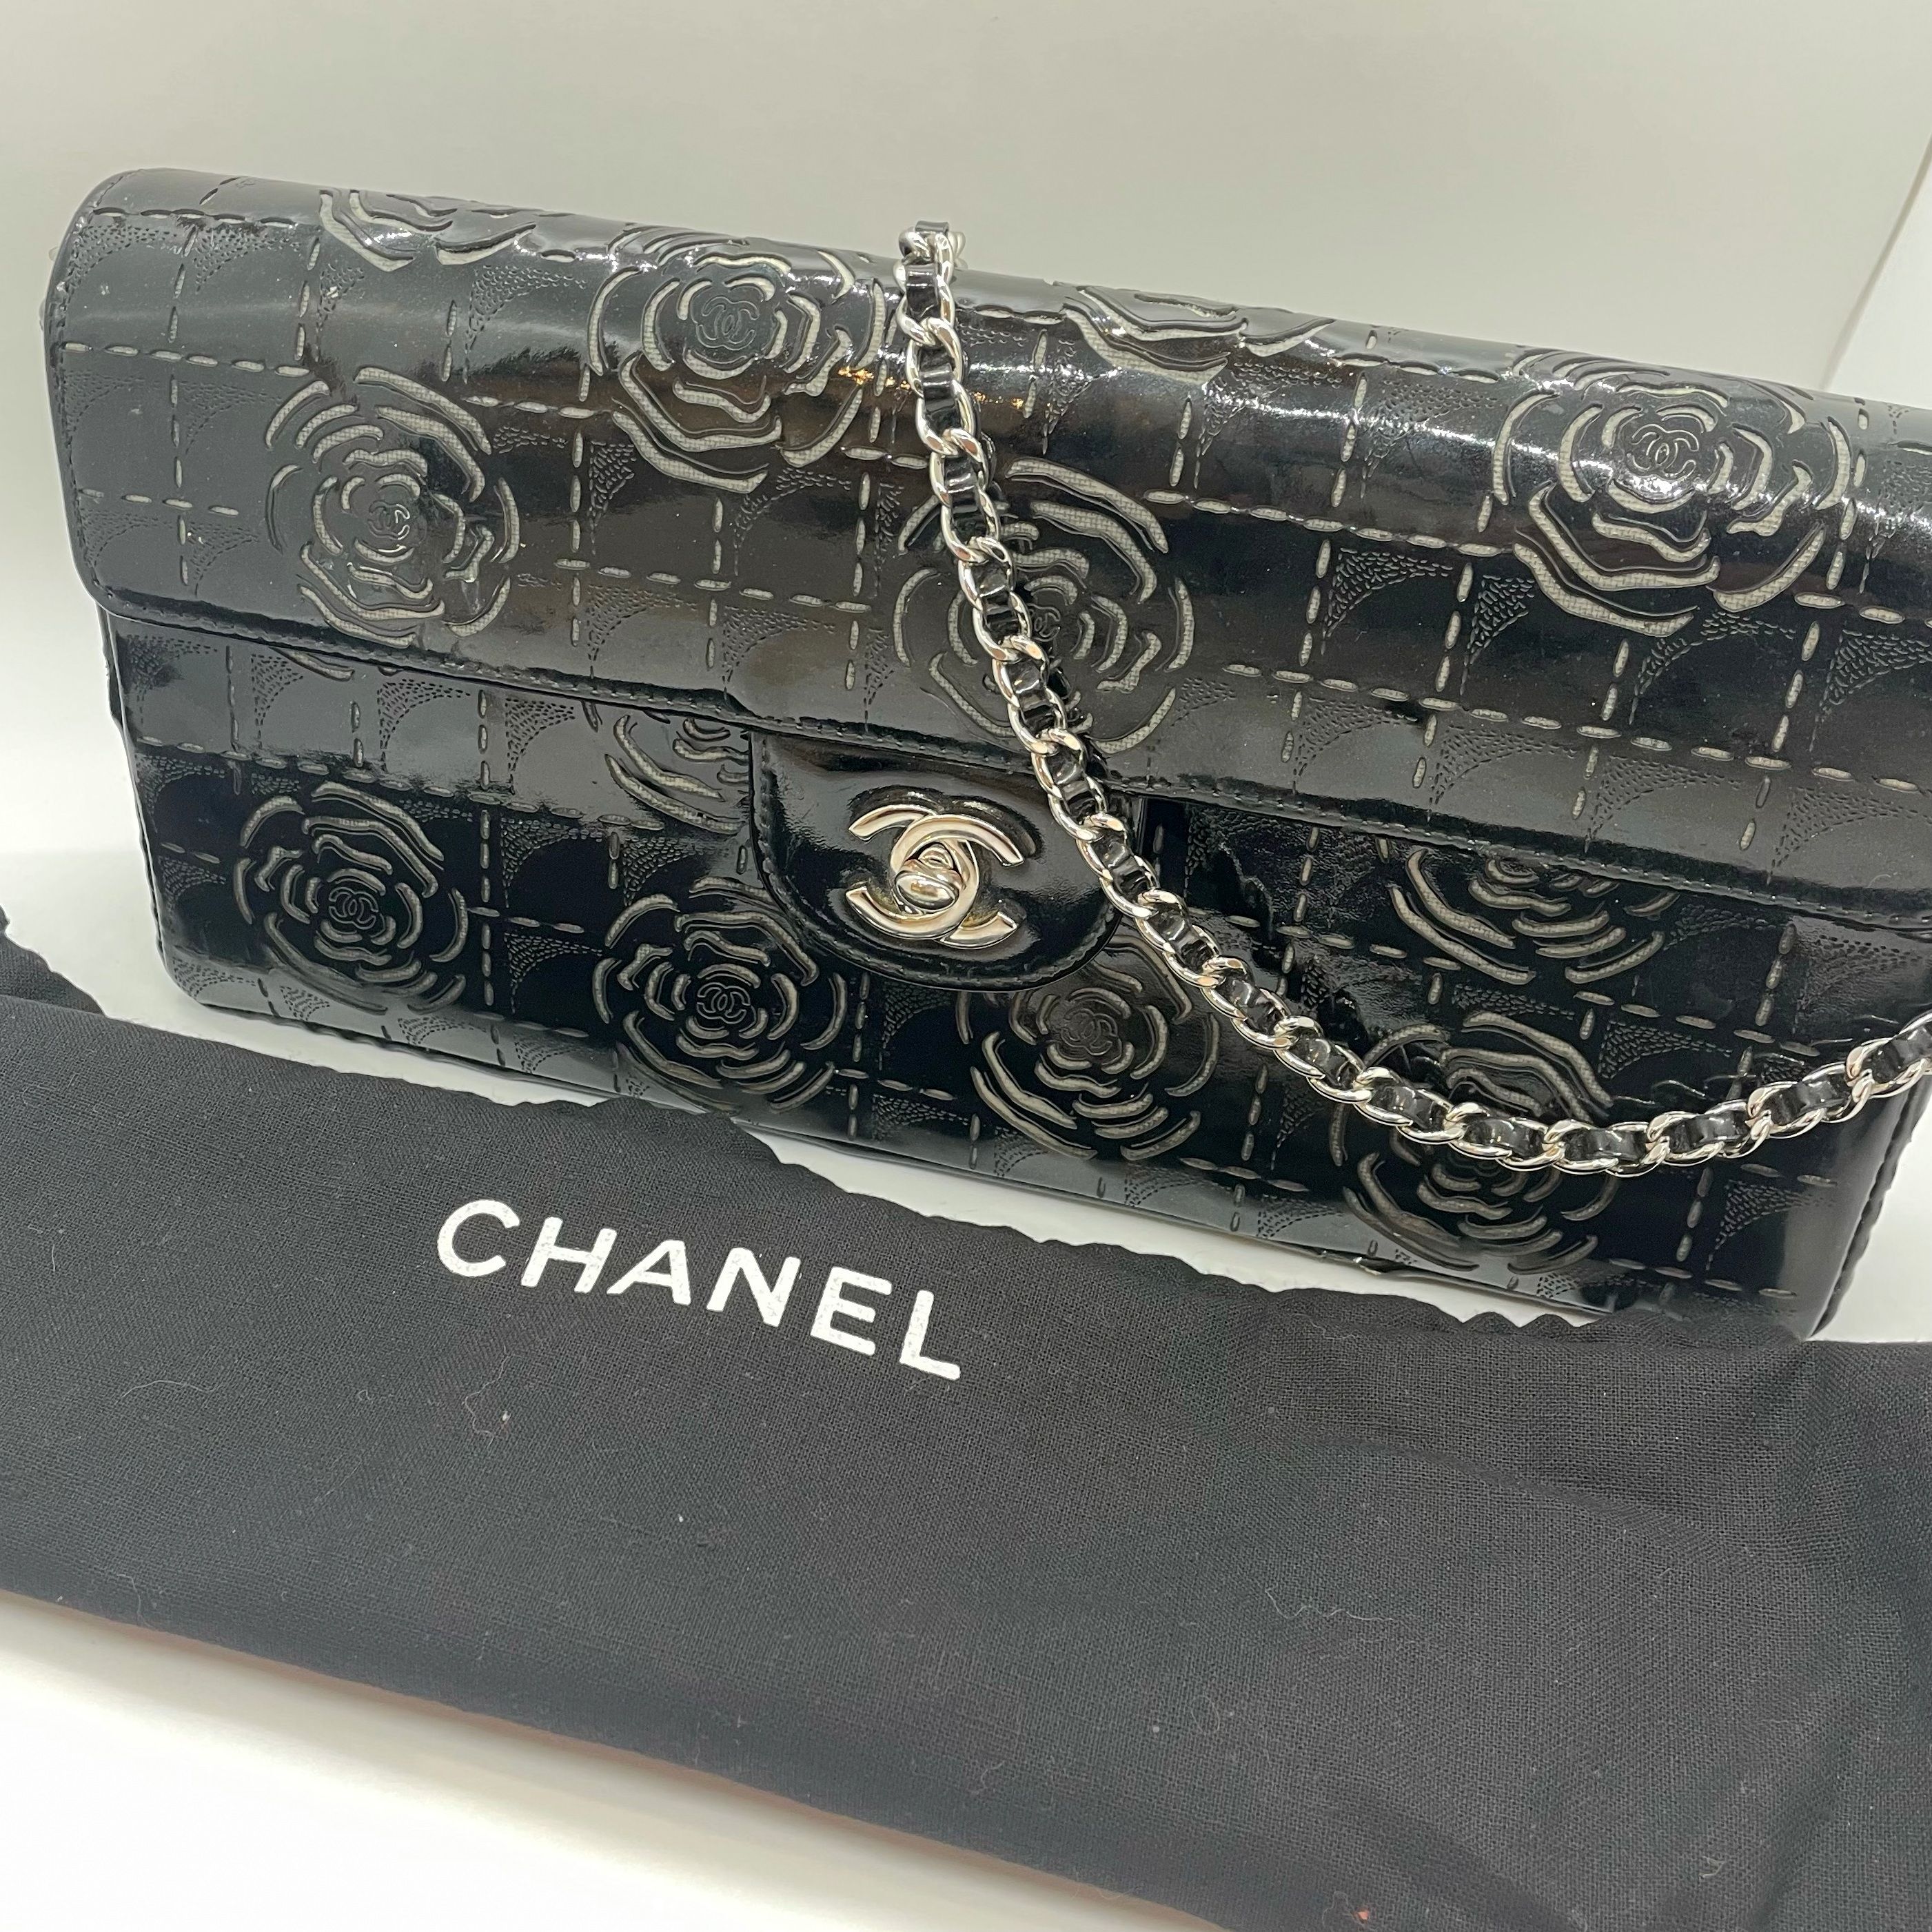 Chanel - East West Flap Bag - Serial Card, dustbag and